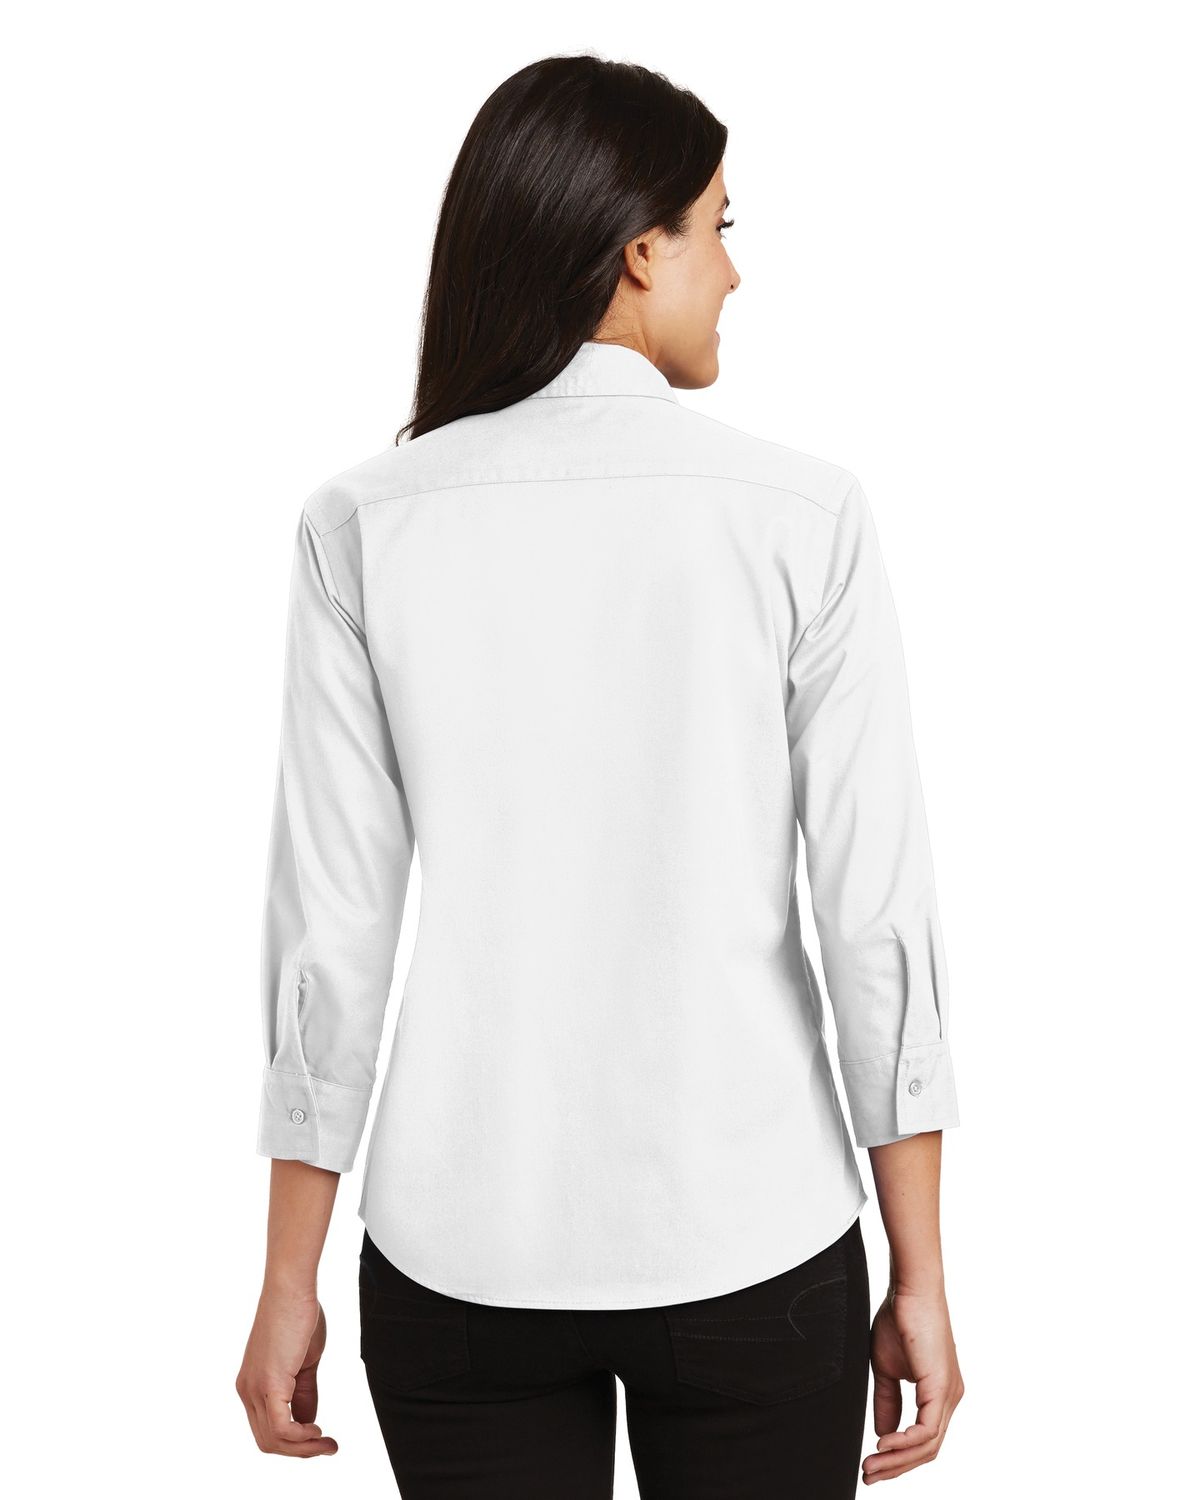 'Port Authority L612 Women’s 3/4-Sleeve Easy Care Shirt'